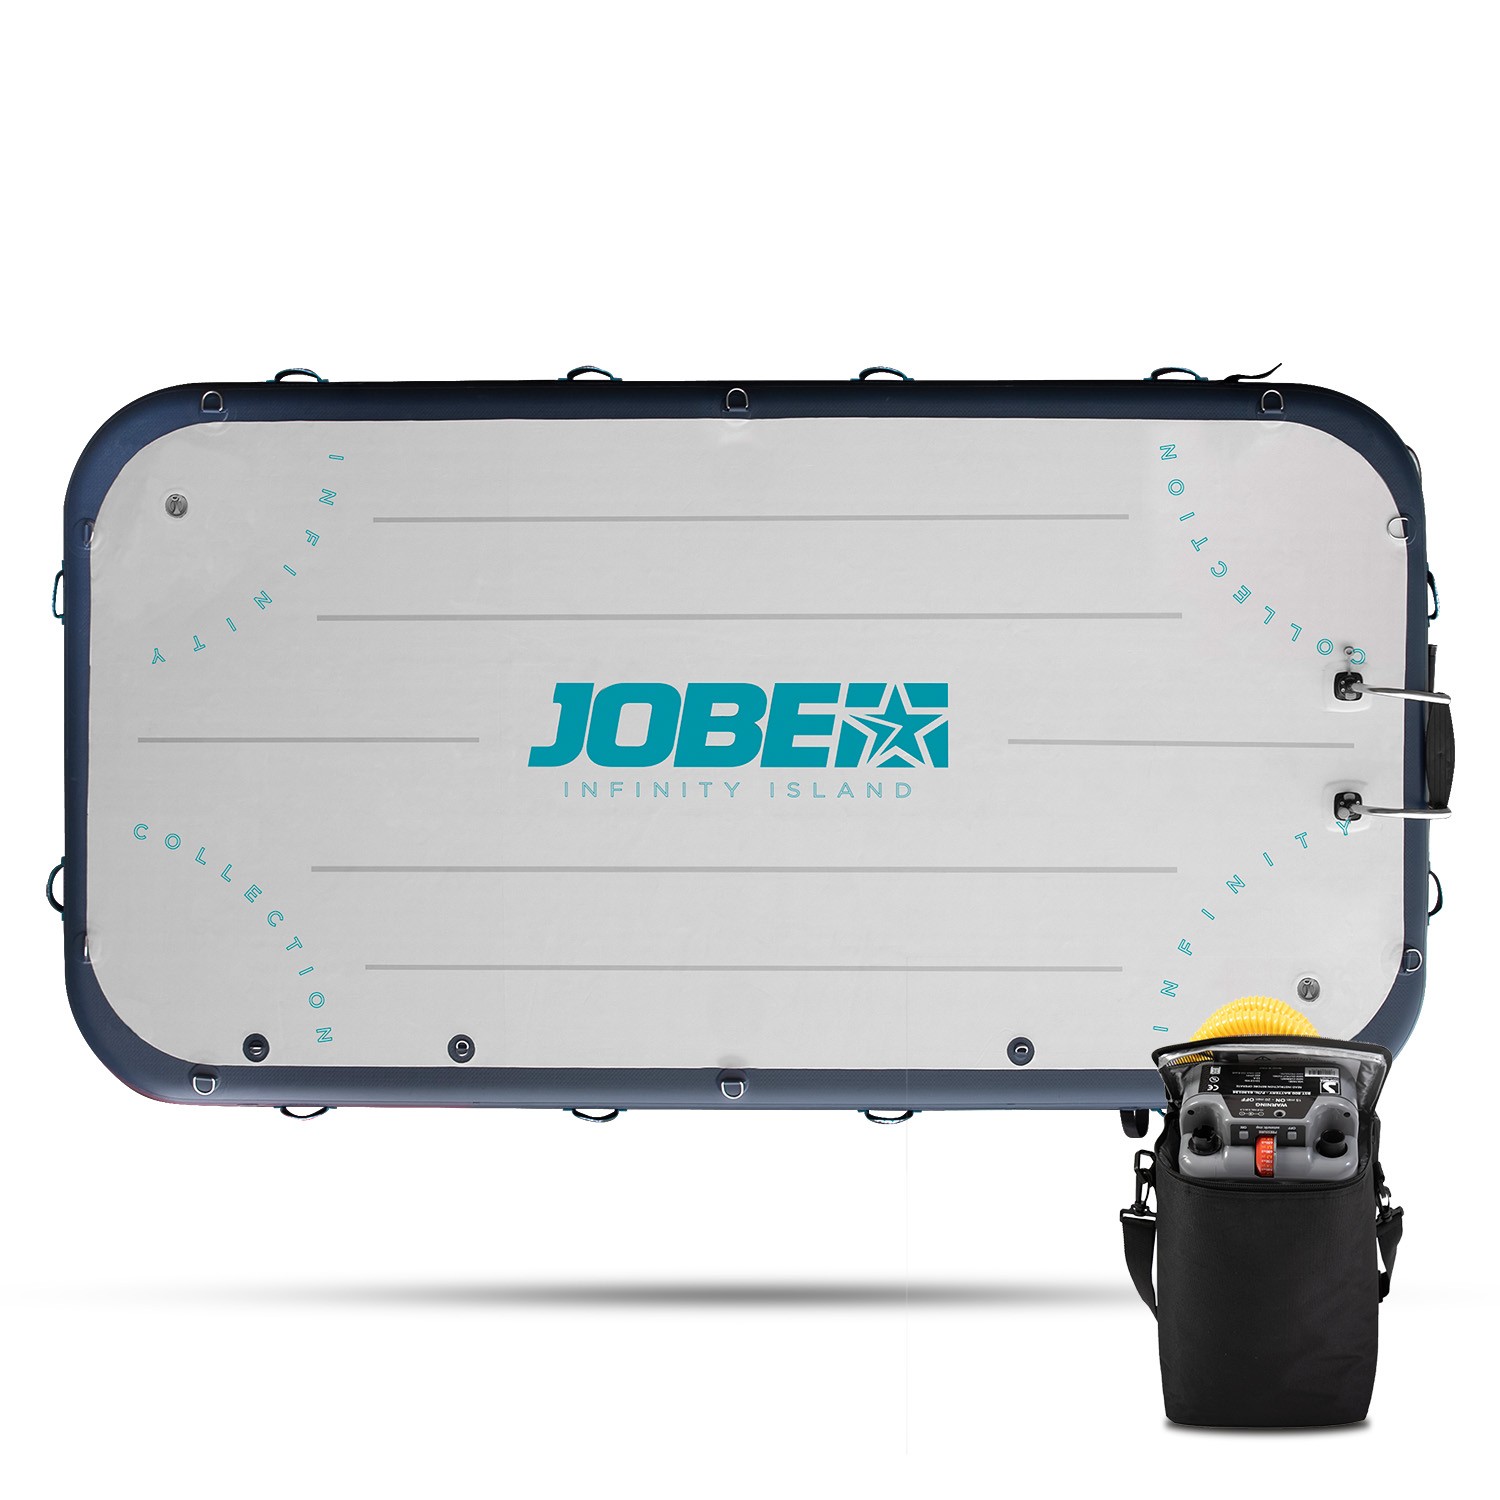 Jobe Infinity Island Plate-forme Gonflable avec Pompe